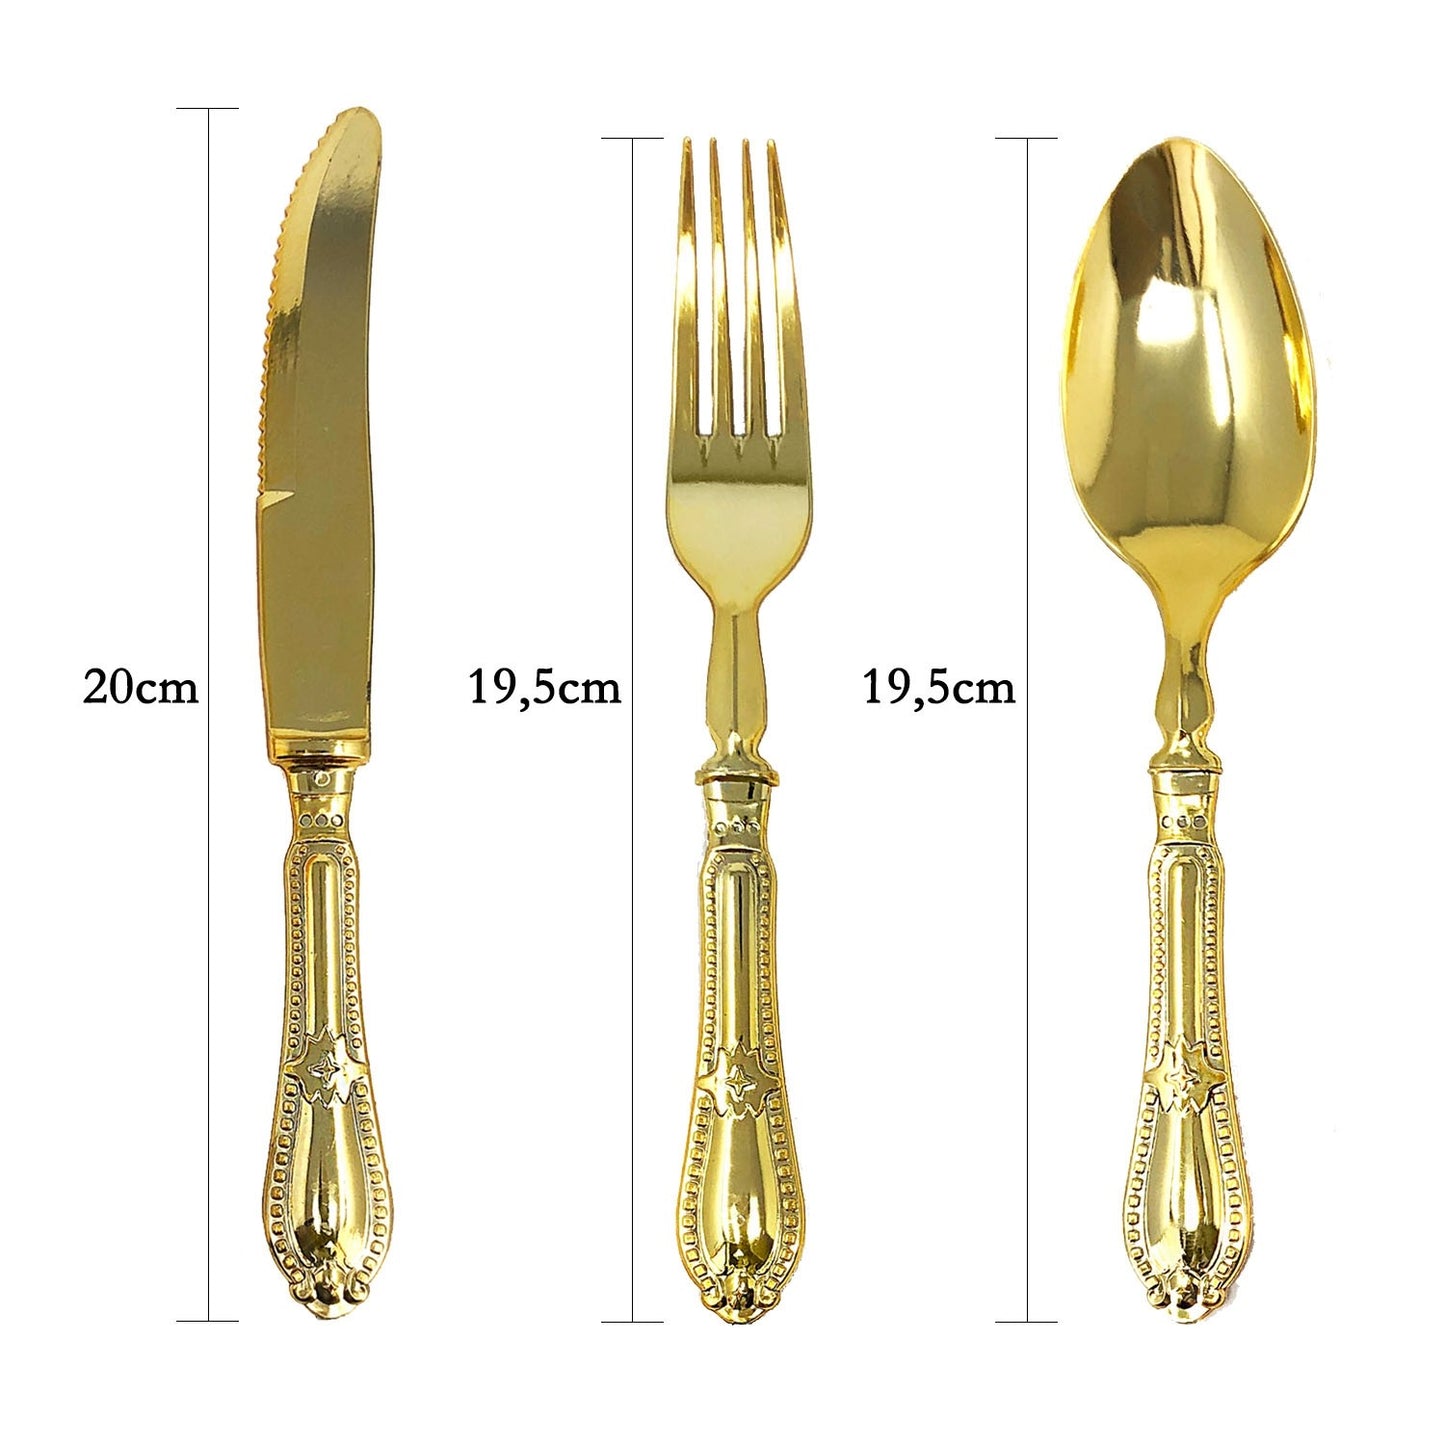 SALE Luxury Baroque Collection Gold Spoons 12 count Tablesettings Decorline   